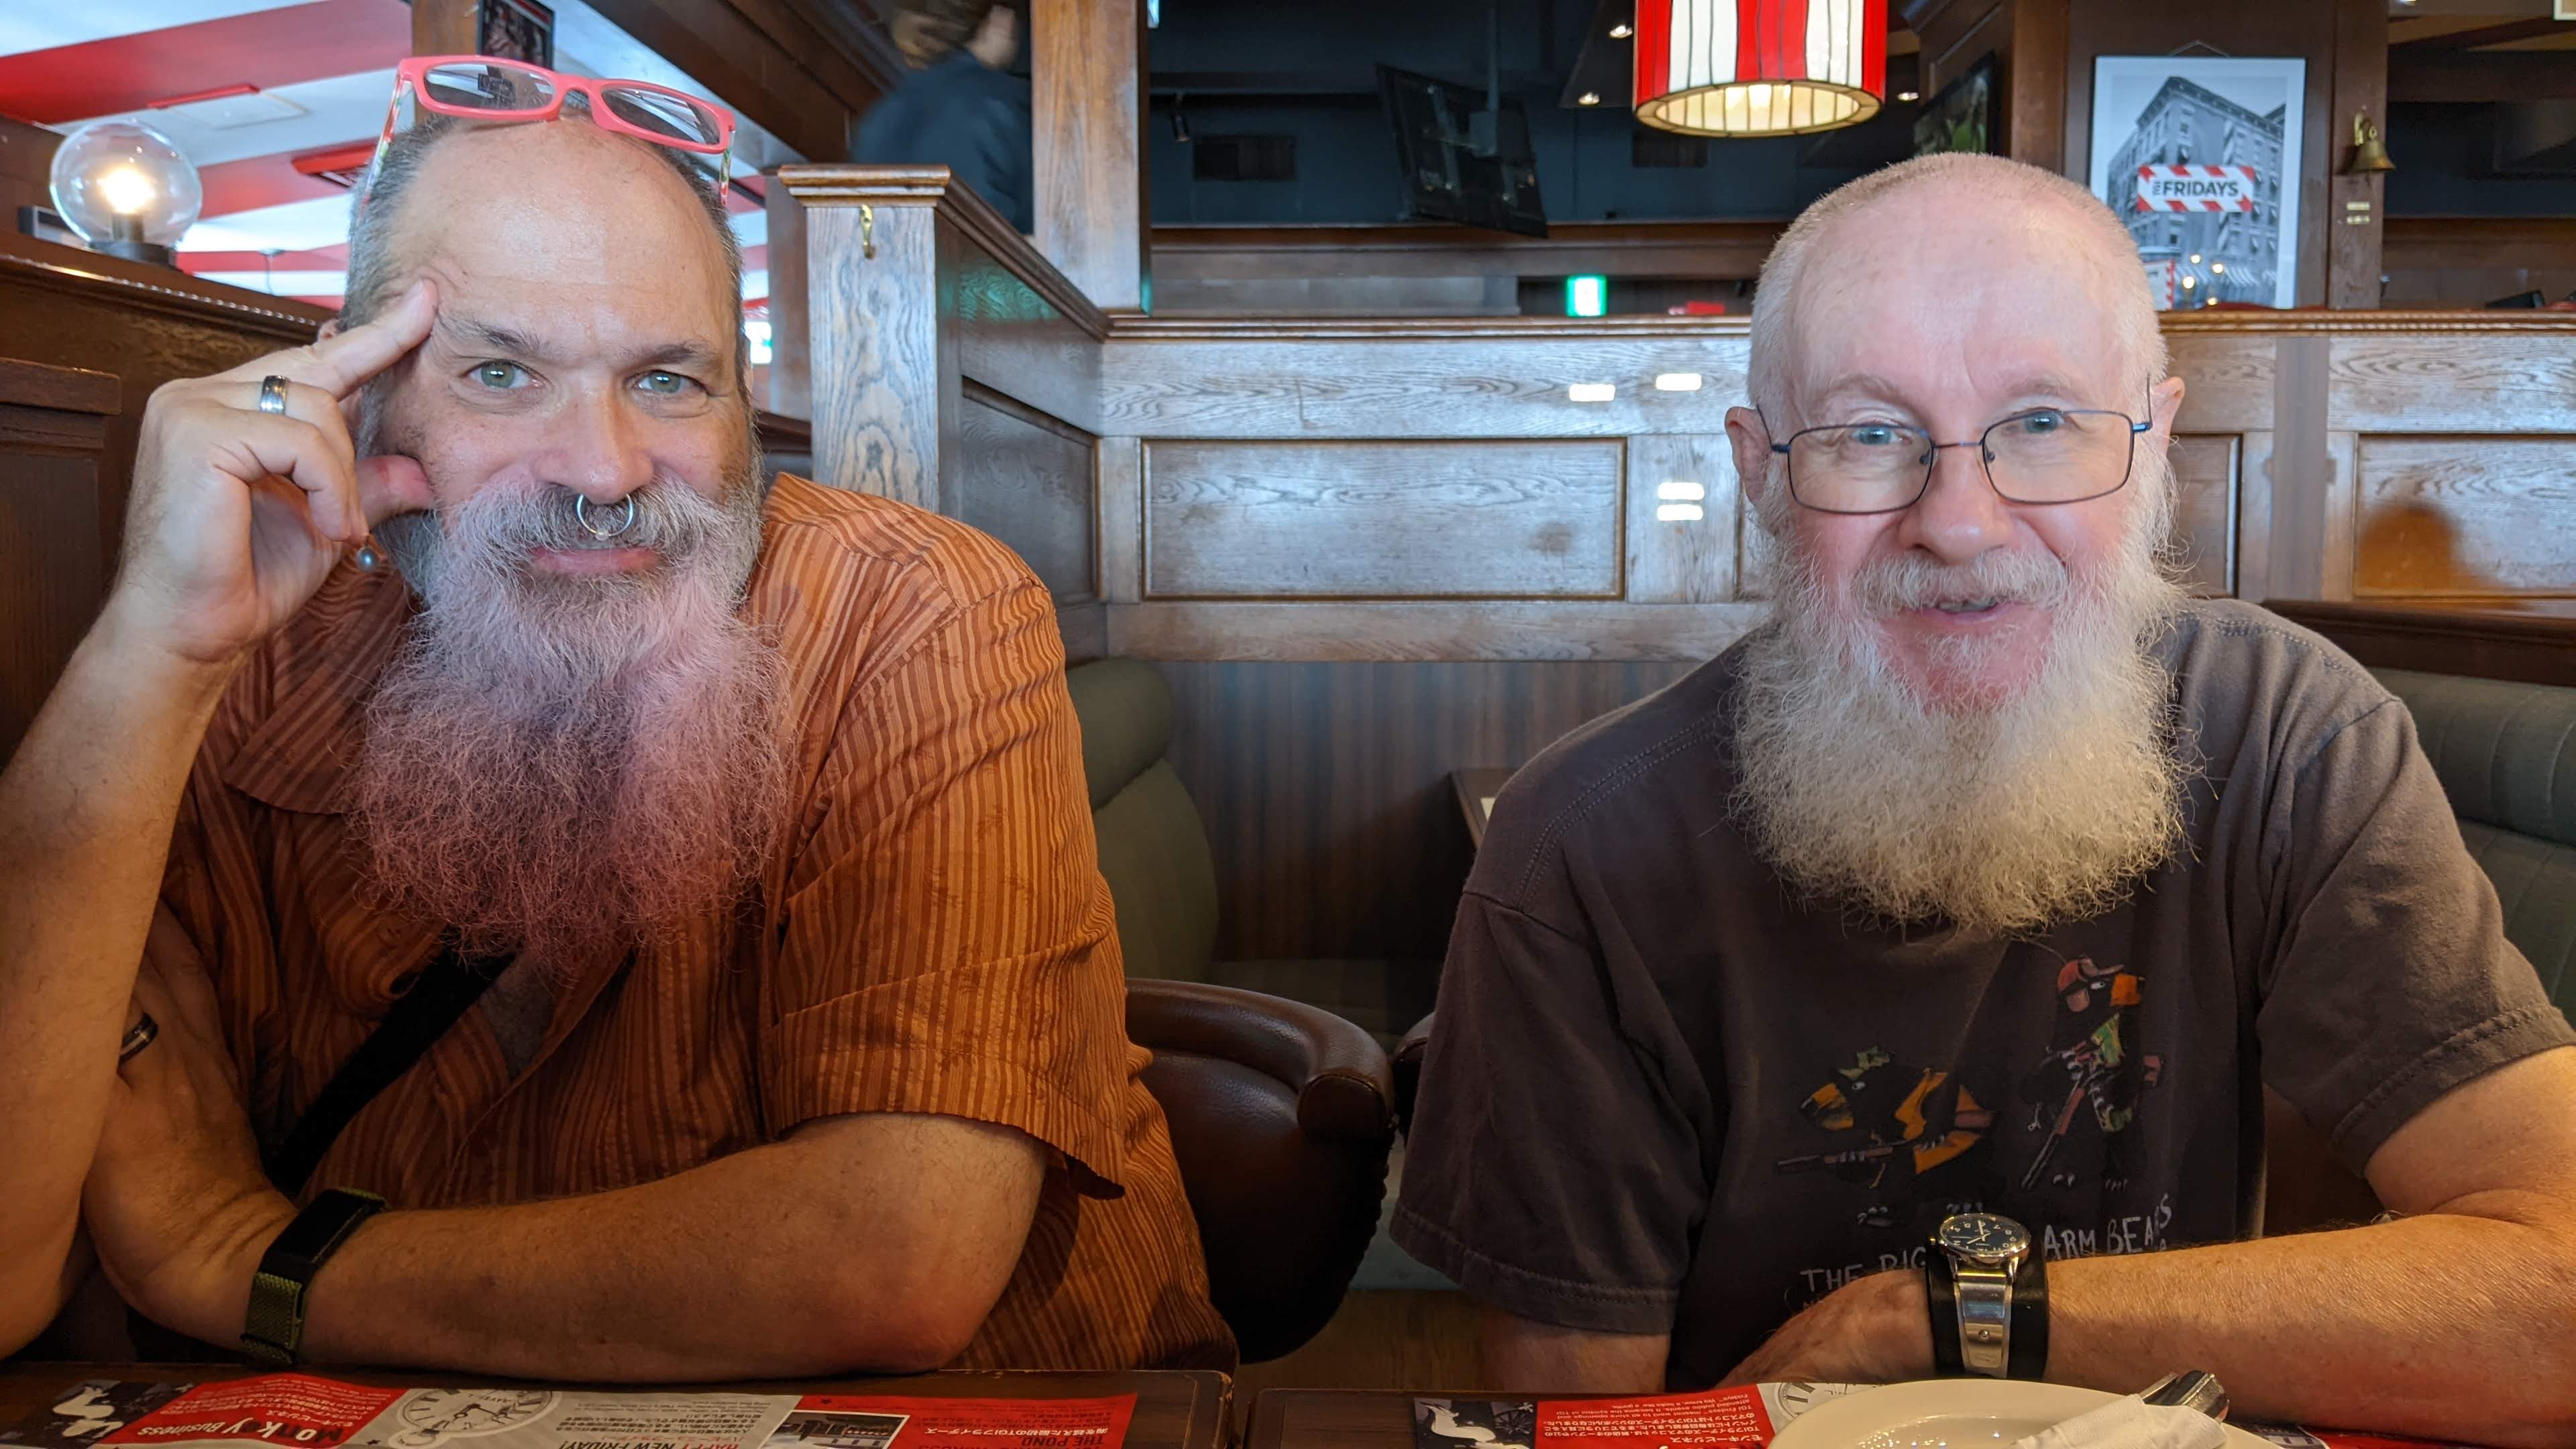 Les with a pink beard and Chris with a white beard